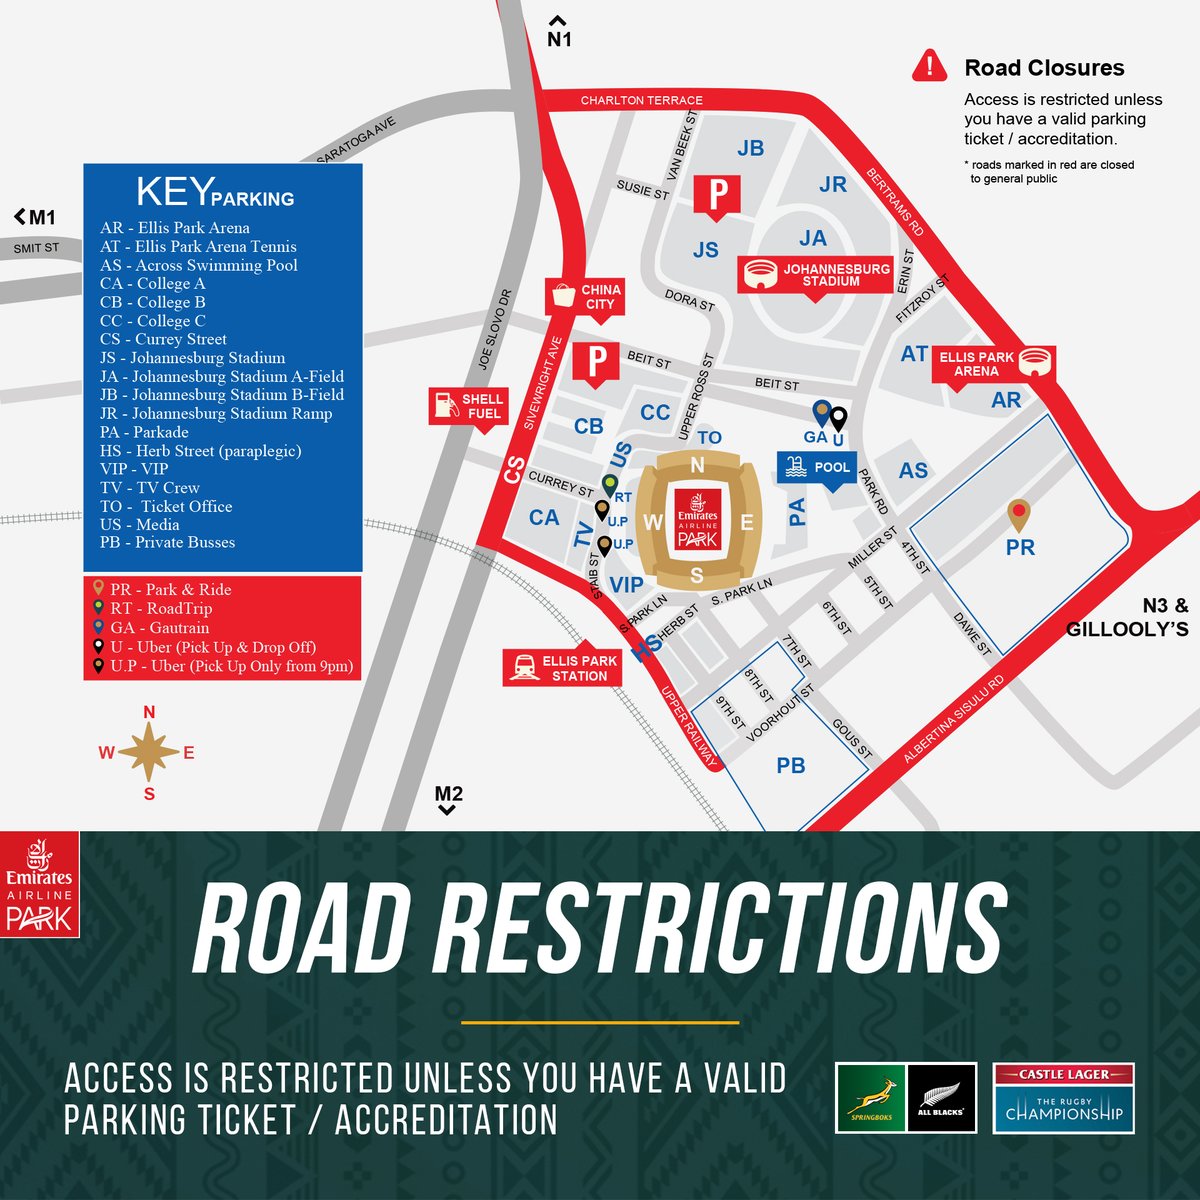 If you're heading to the Park today, take note of the following road closures around the stadium and plan your route accordingly. 